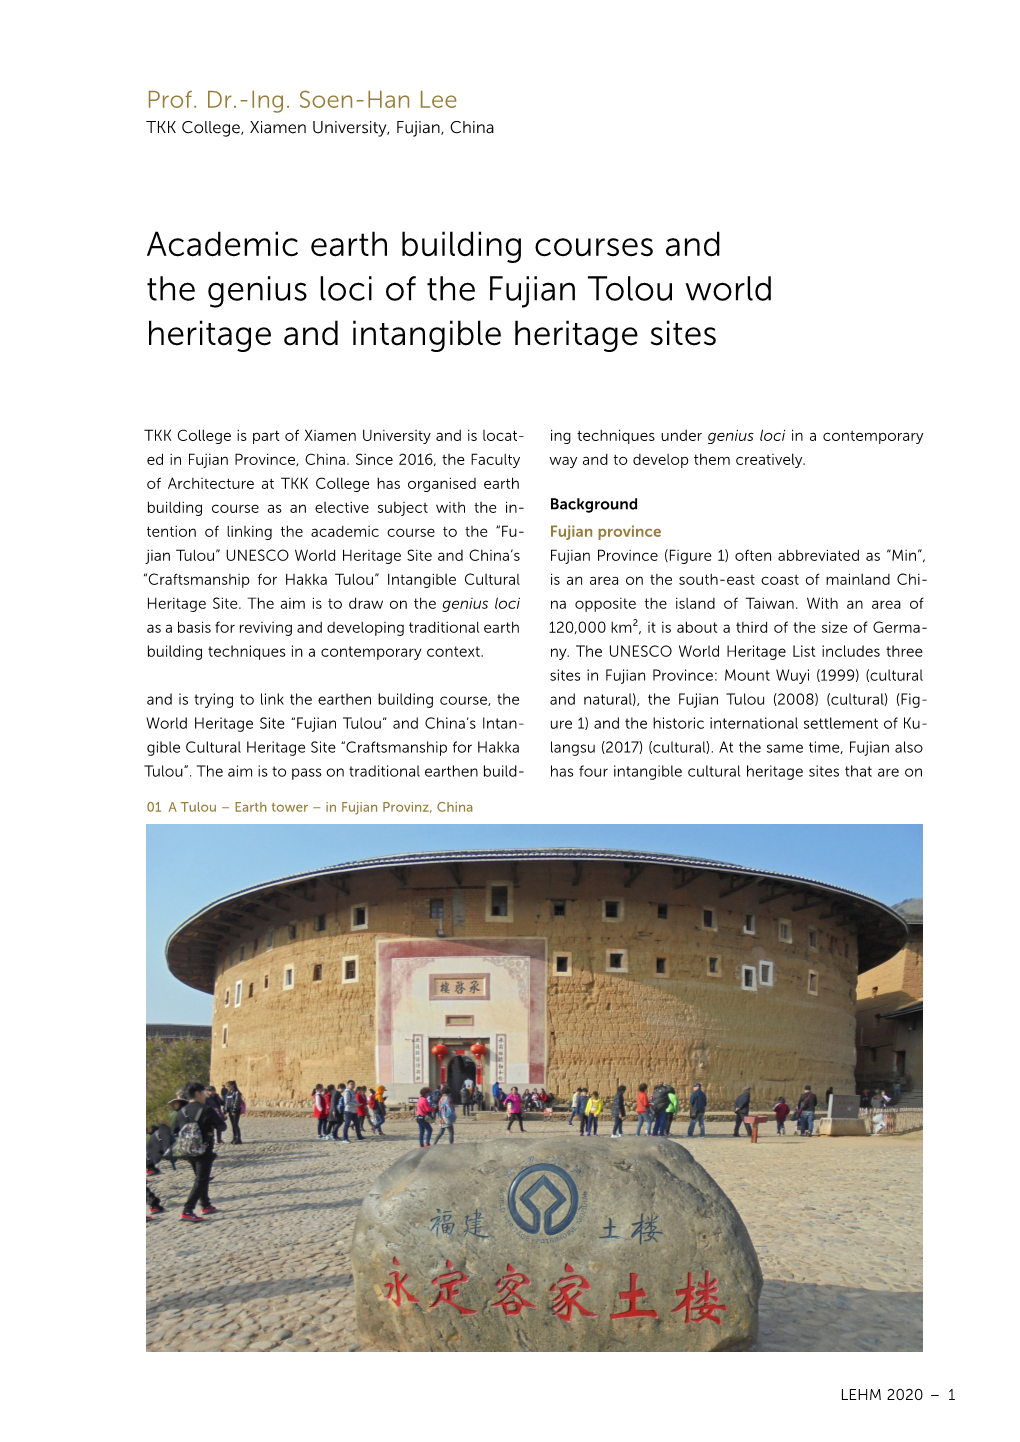 Academic Earth Building Courses and the Genius Loci of the Fujian Tolou World Heritage and Intangible Heritage Sites